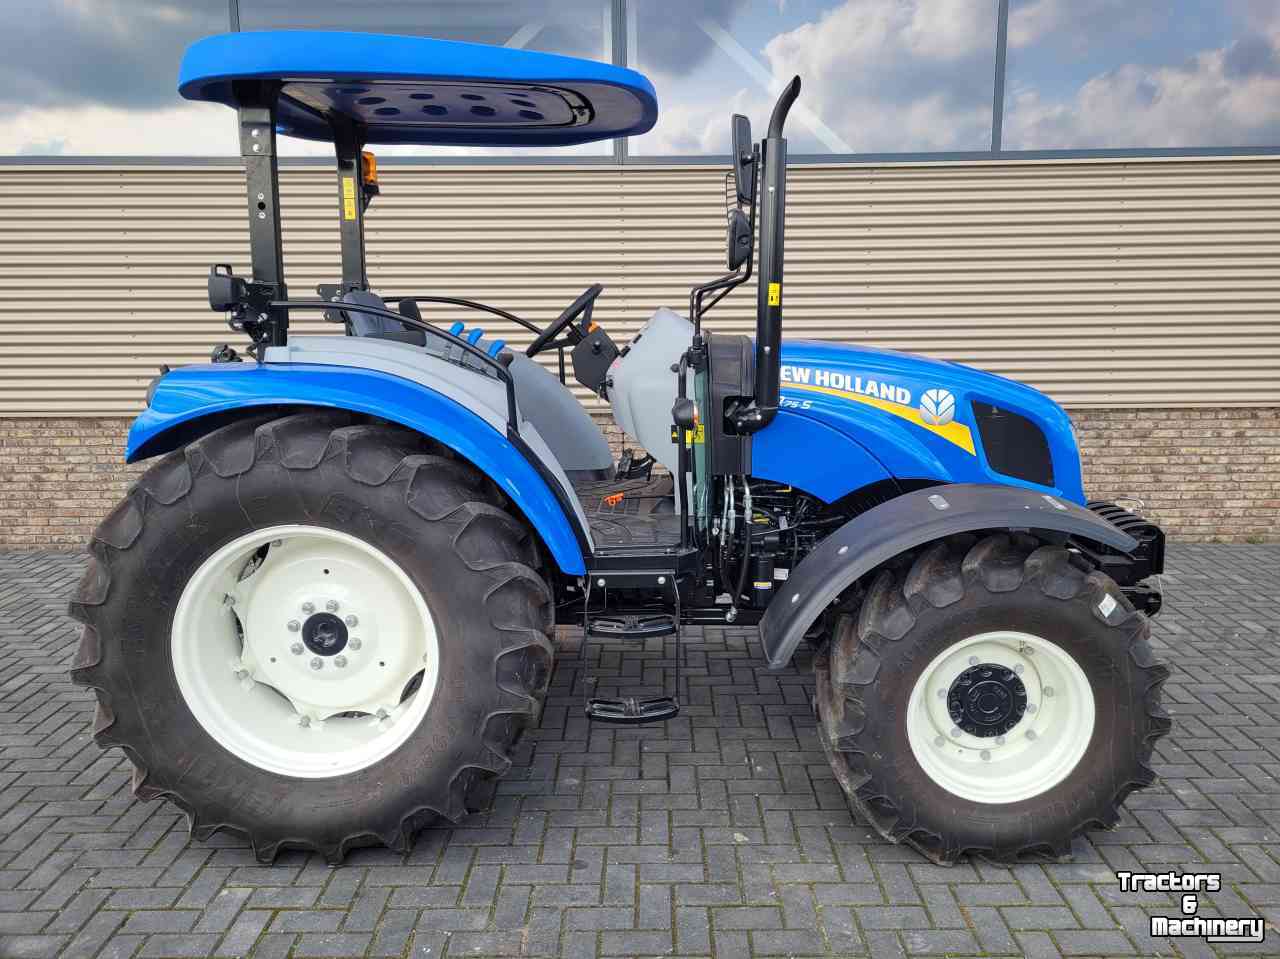 Tracteurs New Holland t4.75